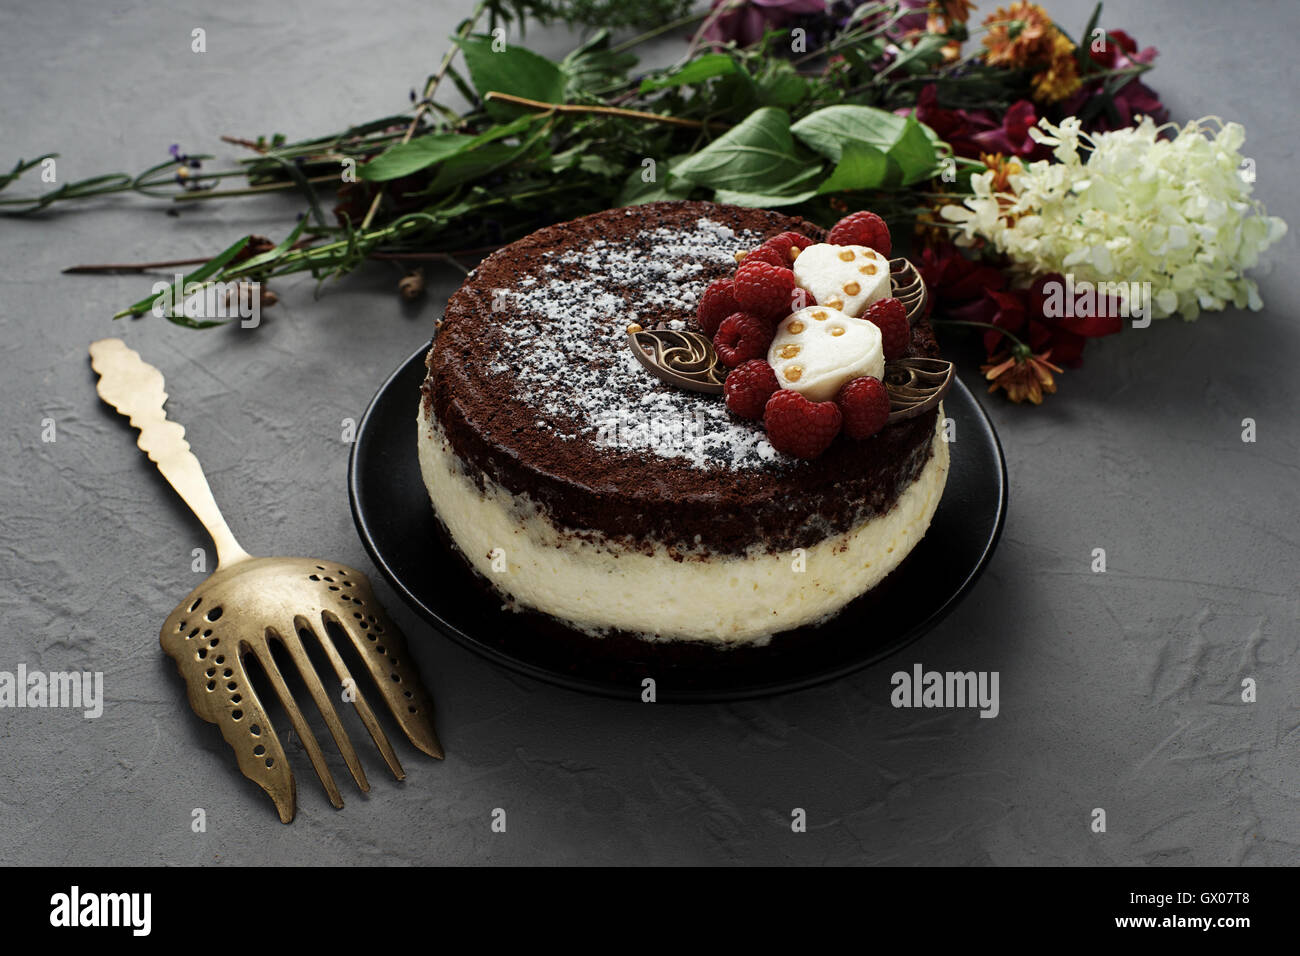 Sweet and delicious compliment to holiday and birthday, will delight you with simplicity and splendor. Stock Photo